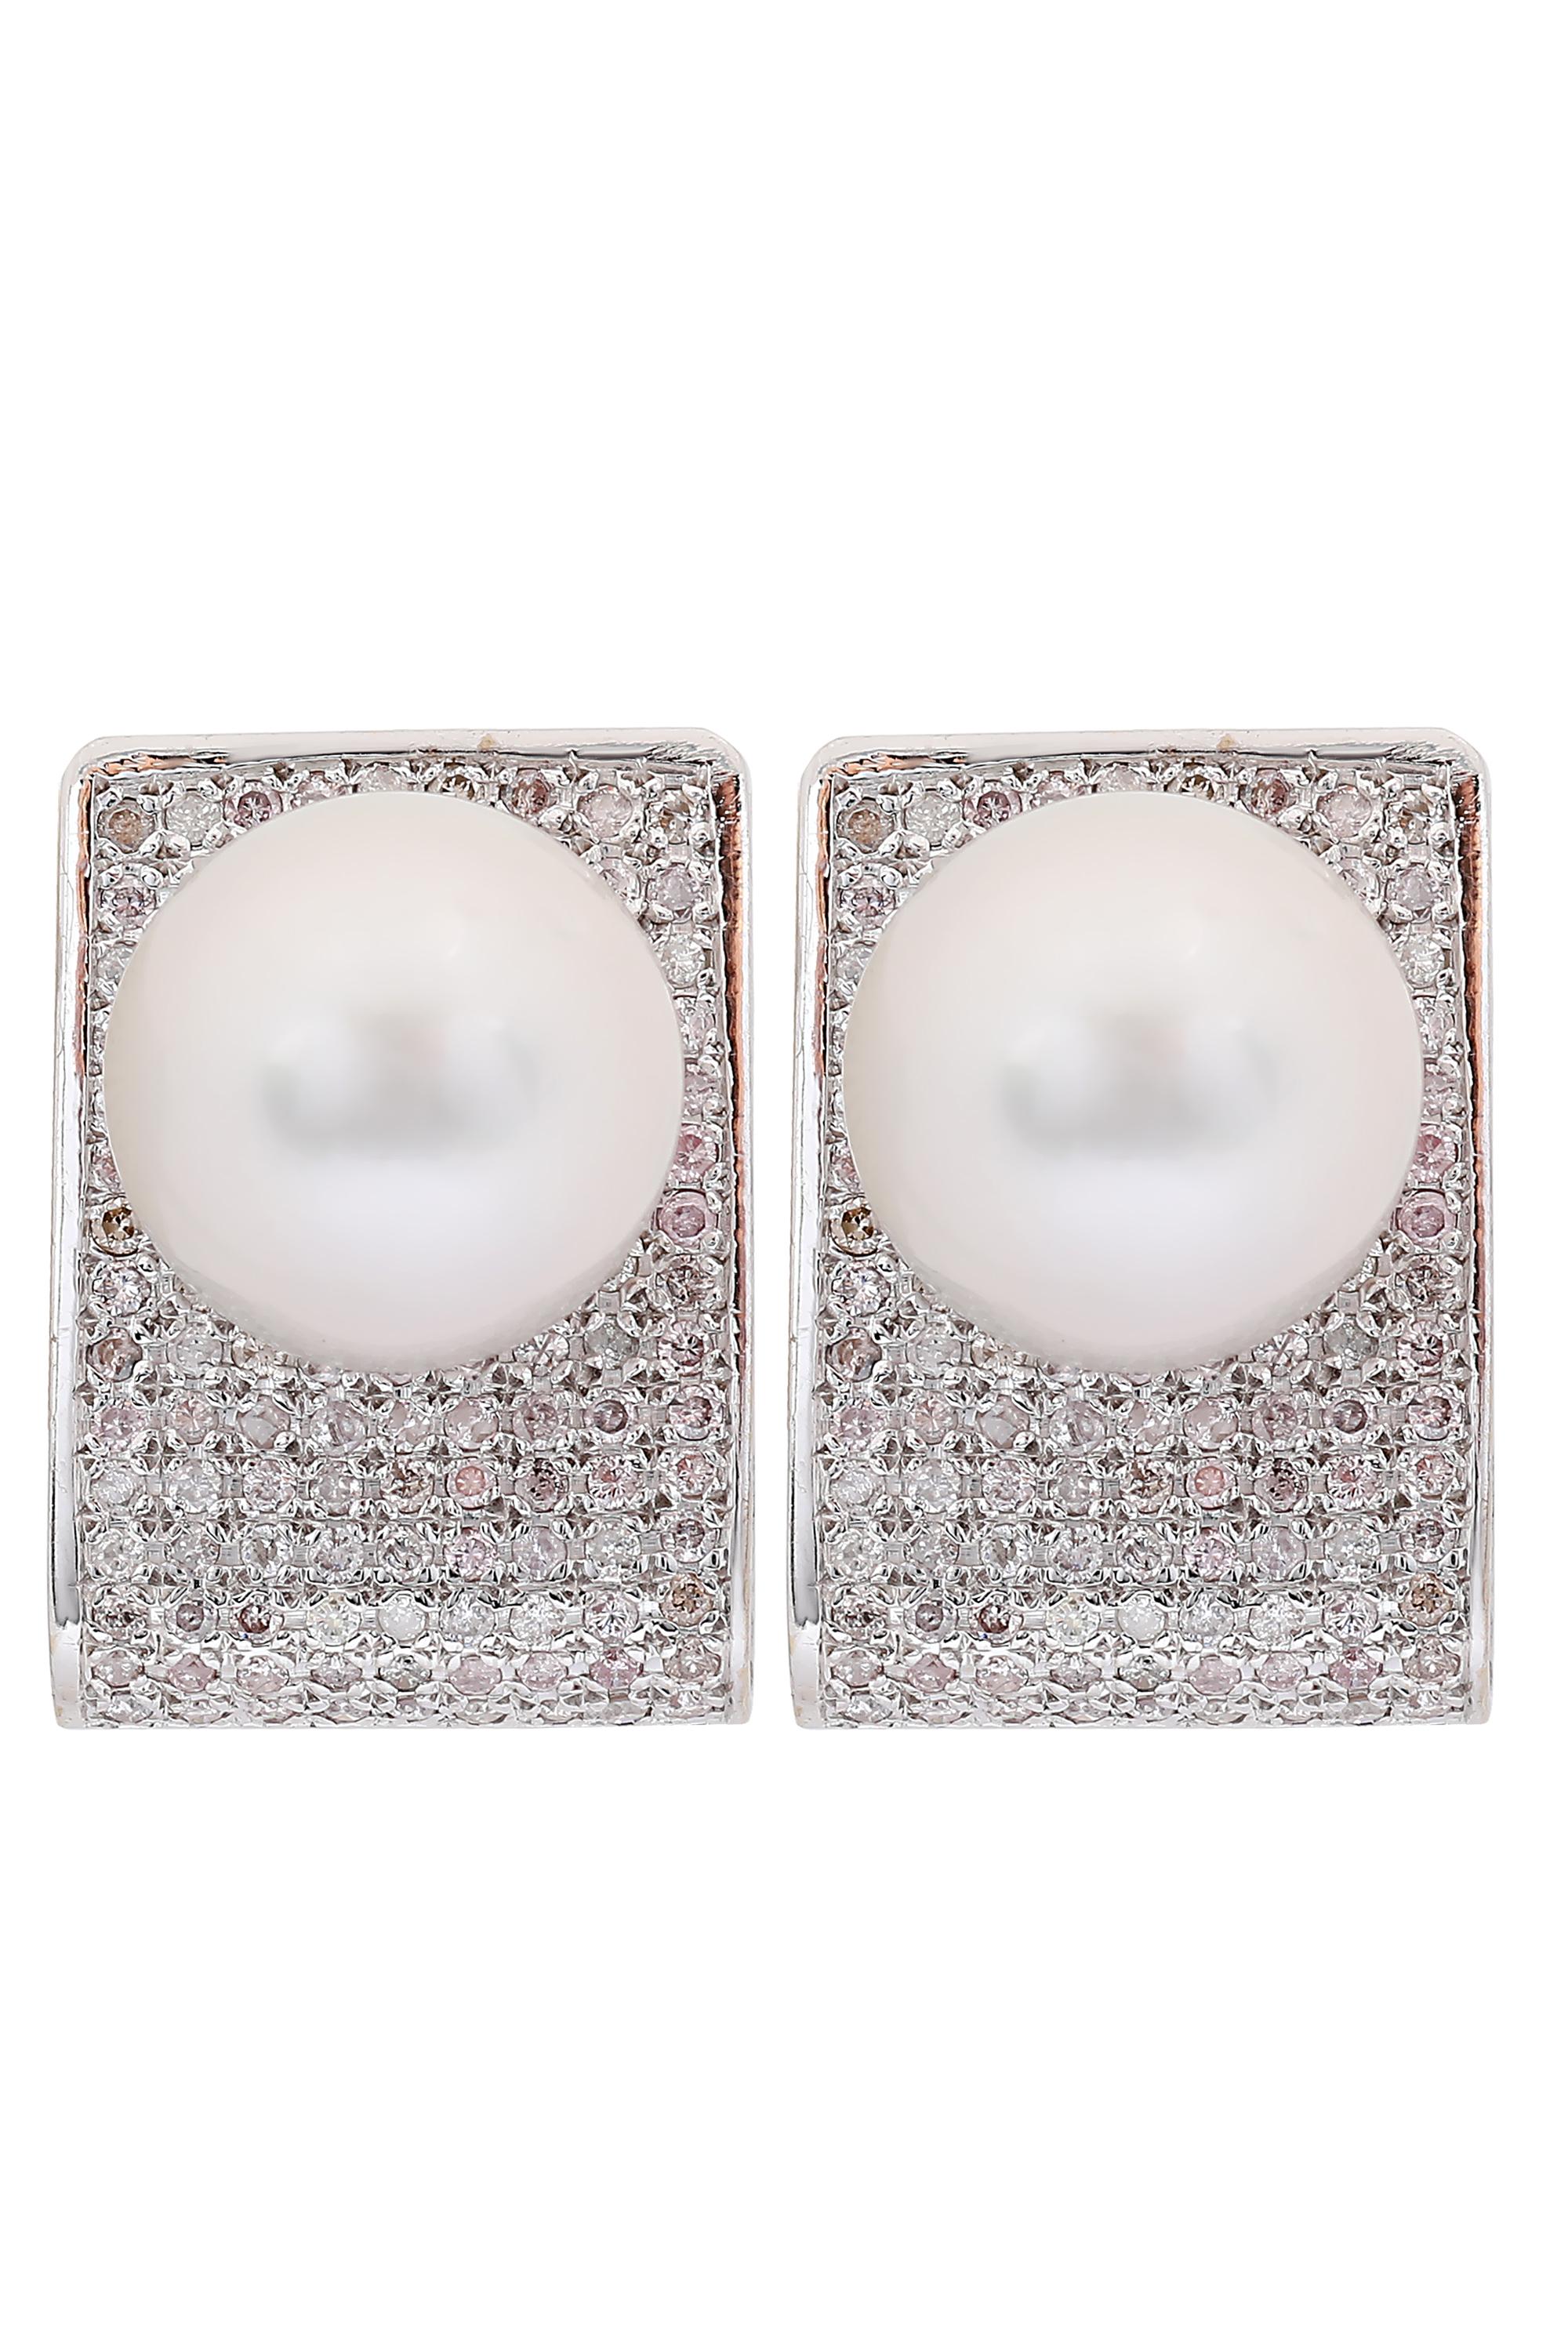 Women's or Men's South Sea Pearl and Diamond Ring, Earrings and Pendant Set For Sale